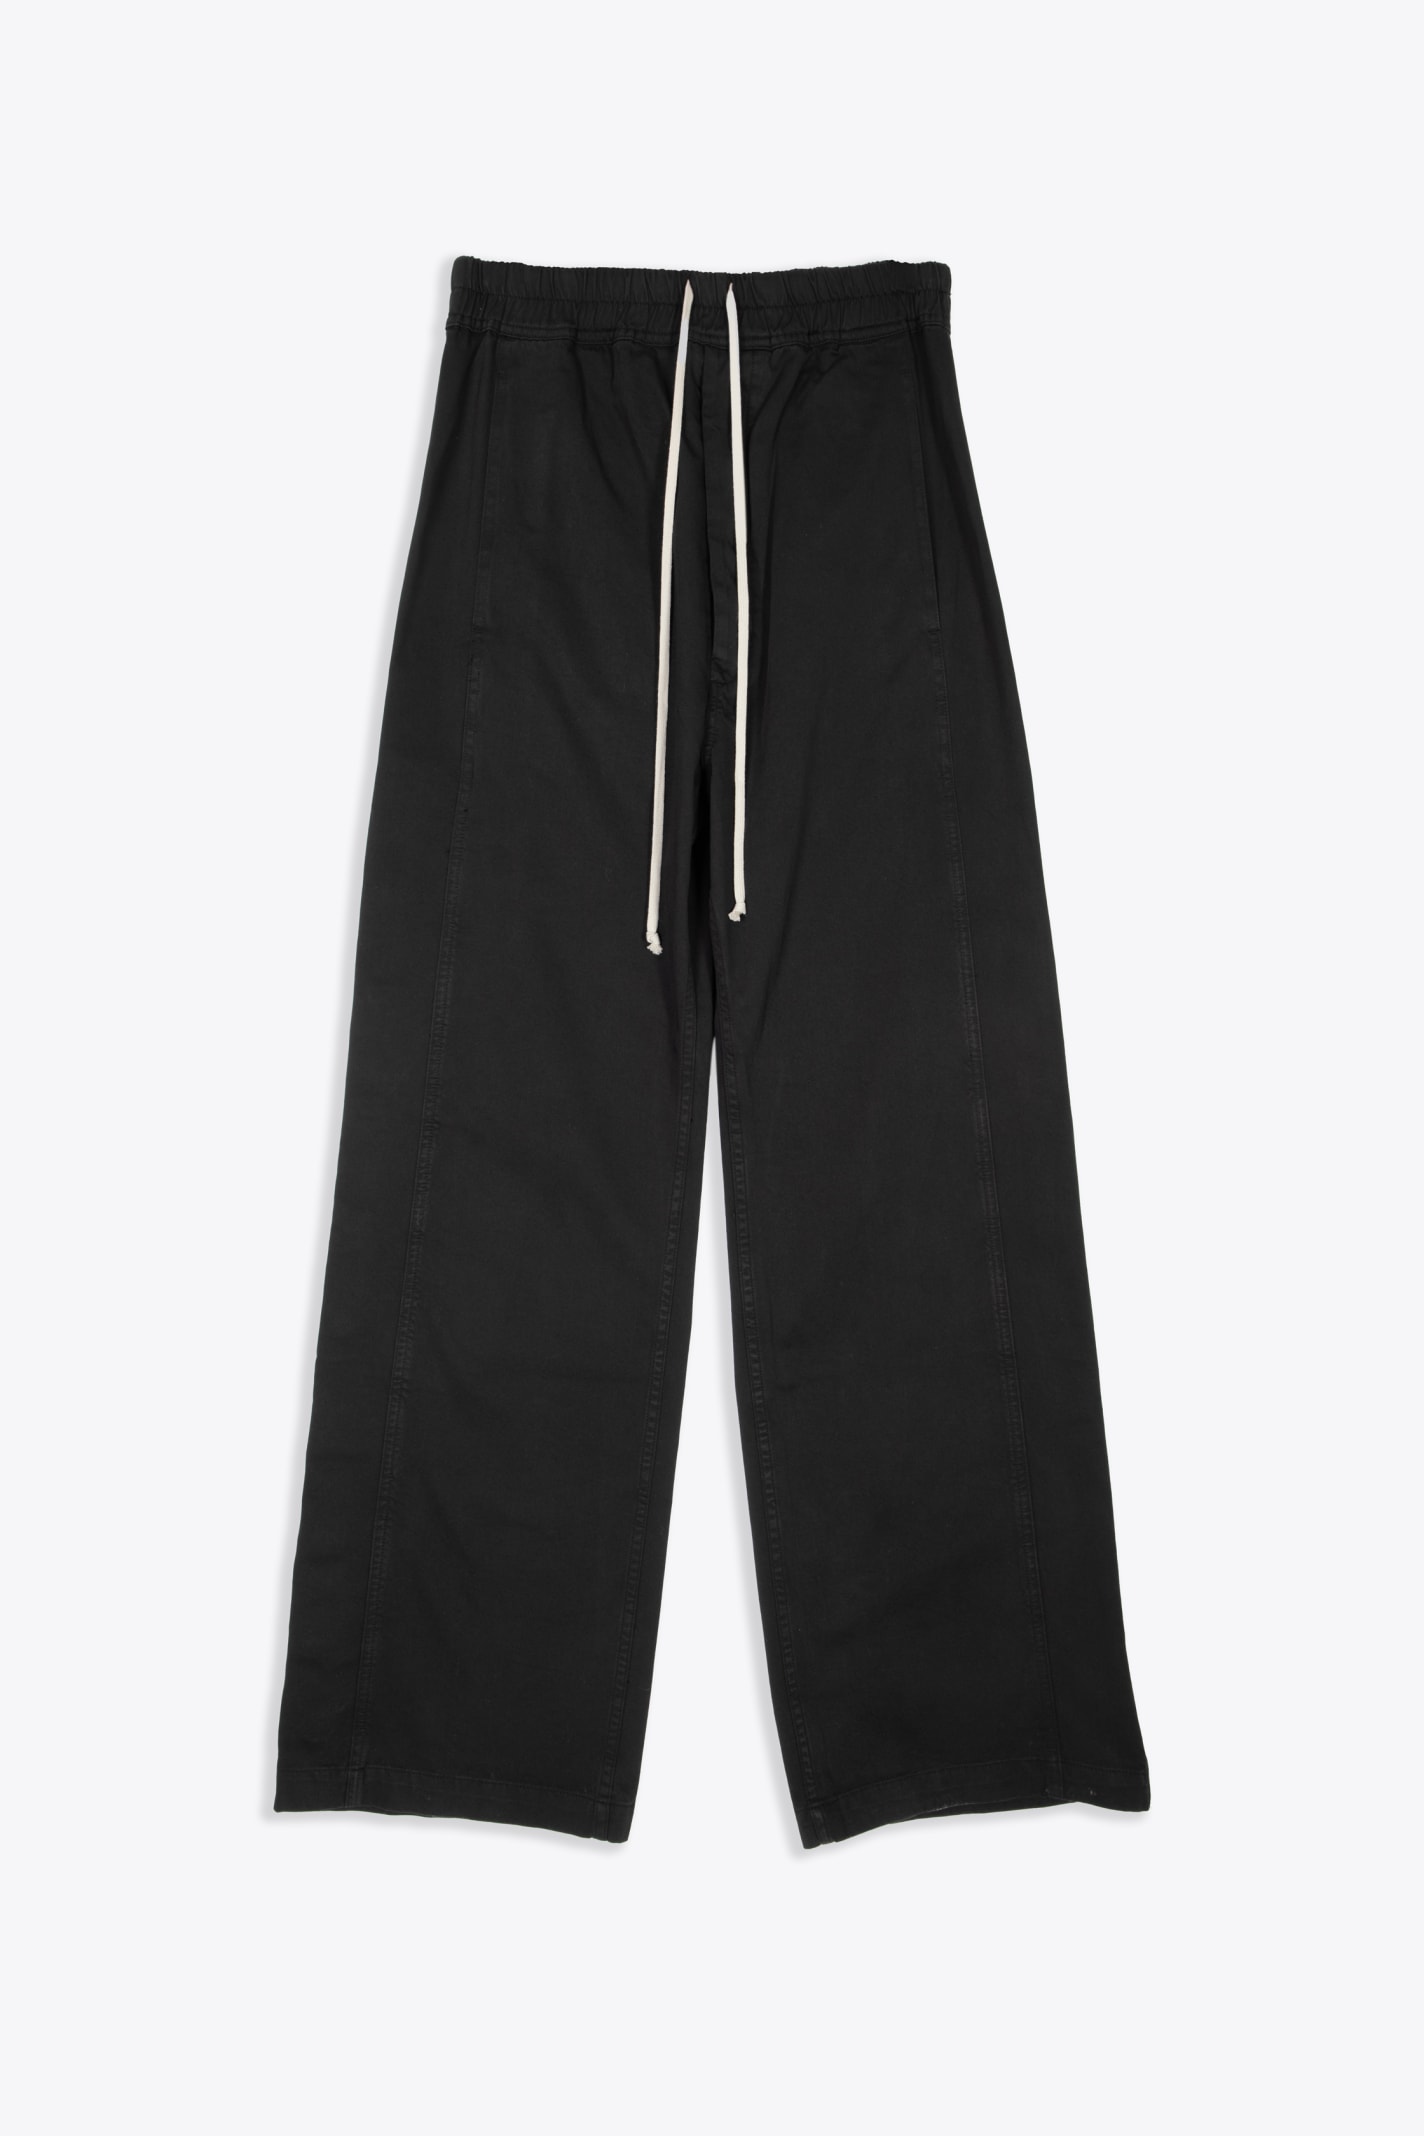 Drkshdw Pusher Pants Black Cotton Twill Pants With Side Snaps - Pusher Pants In Nero